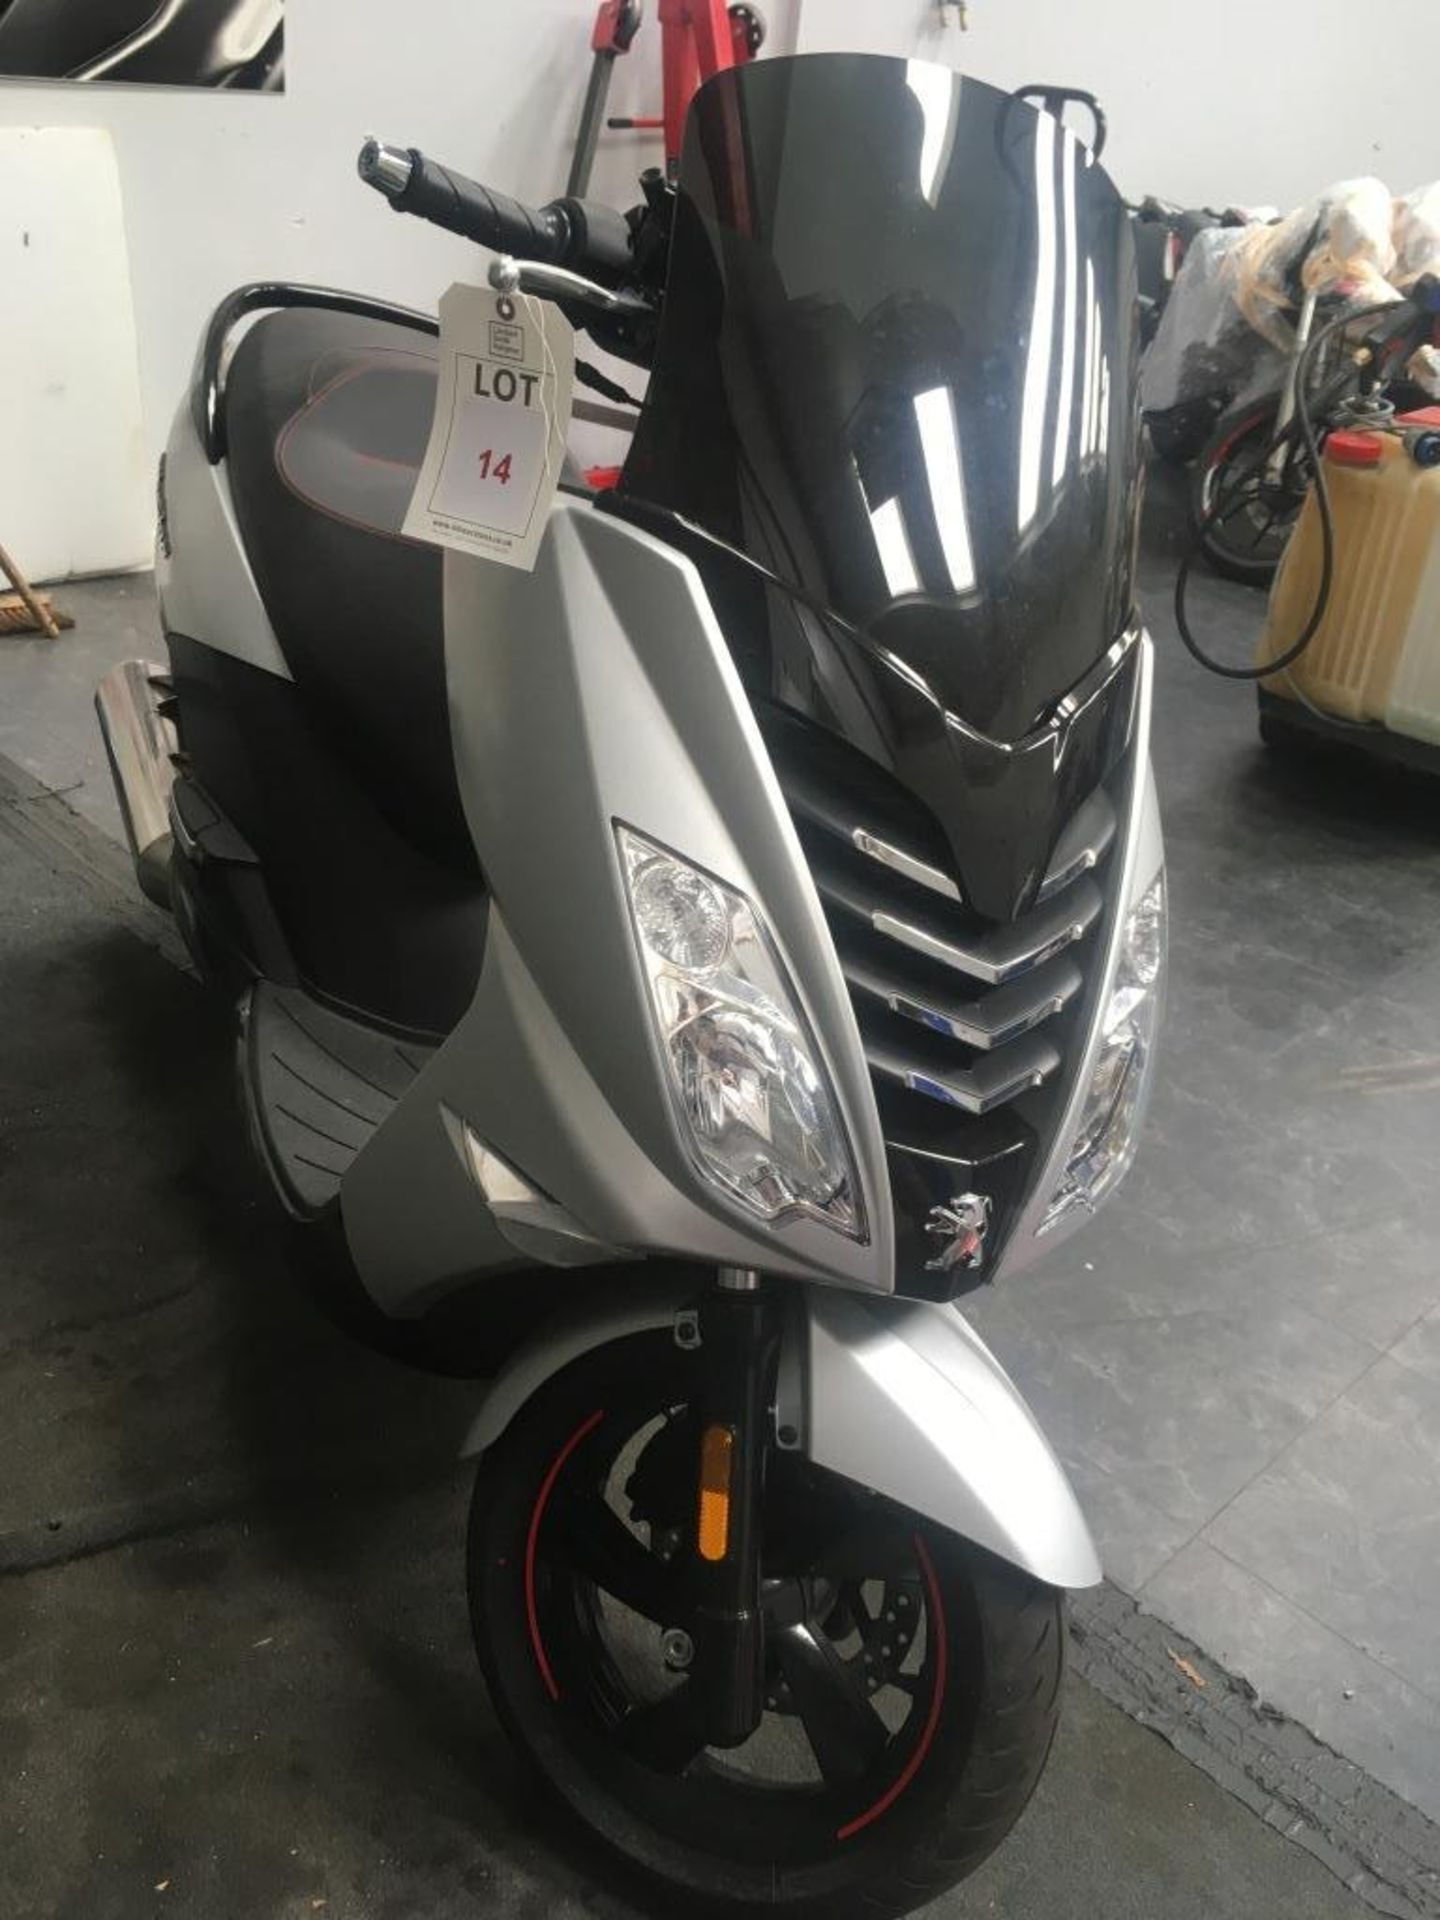 Peugeot Citystar 200 LC RS ABS moped, Unregistered and no certificate of conformity held, VIN: - Image 5 of 9